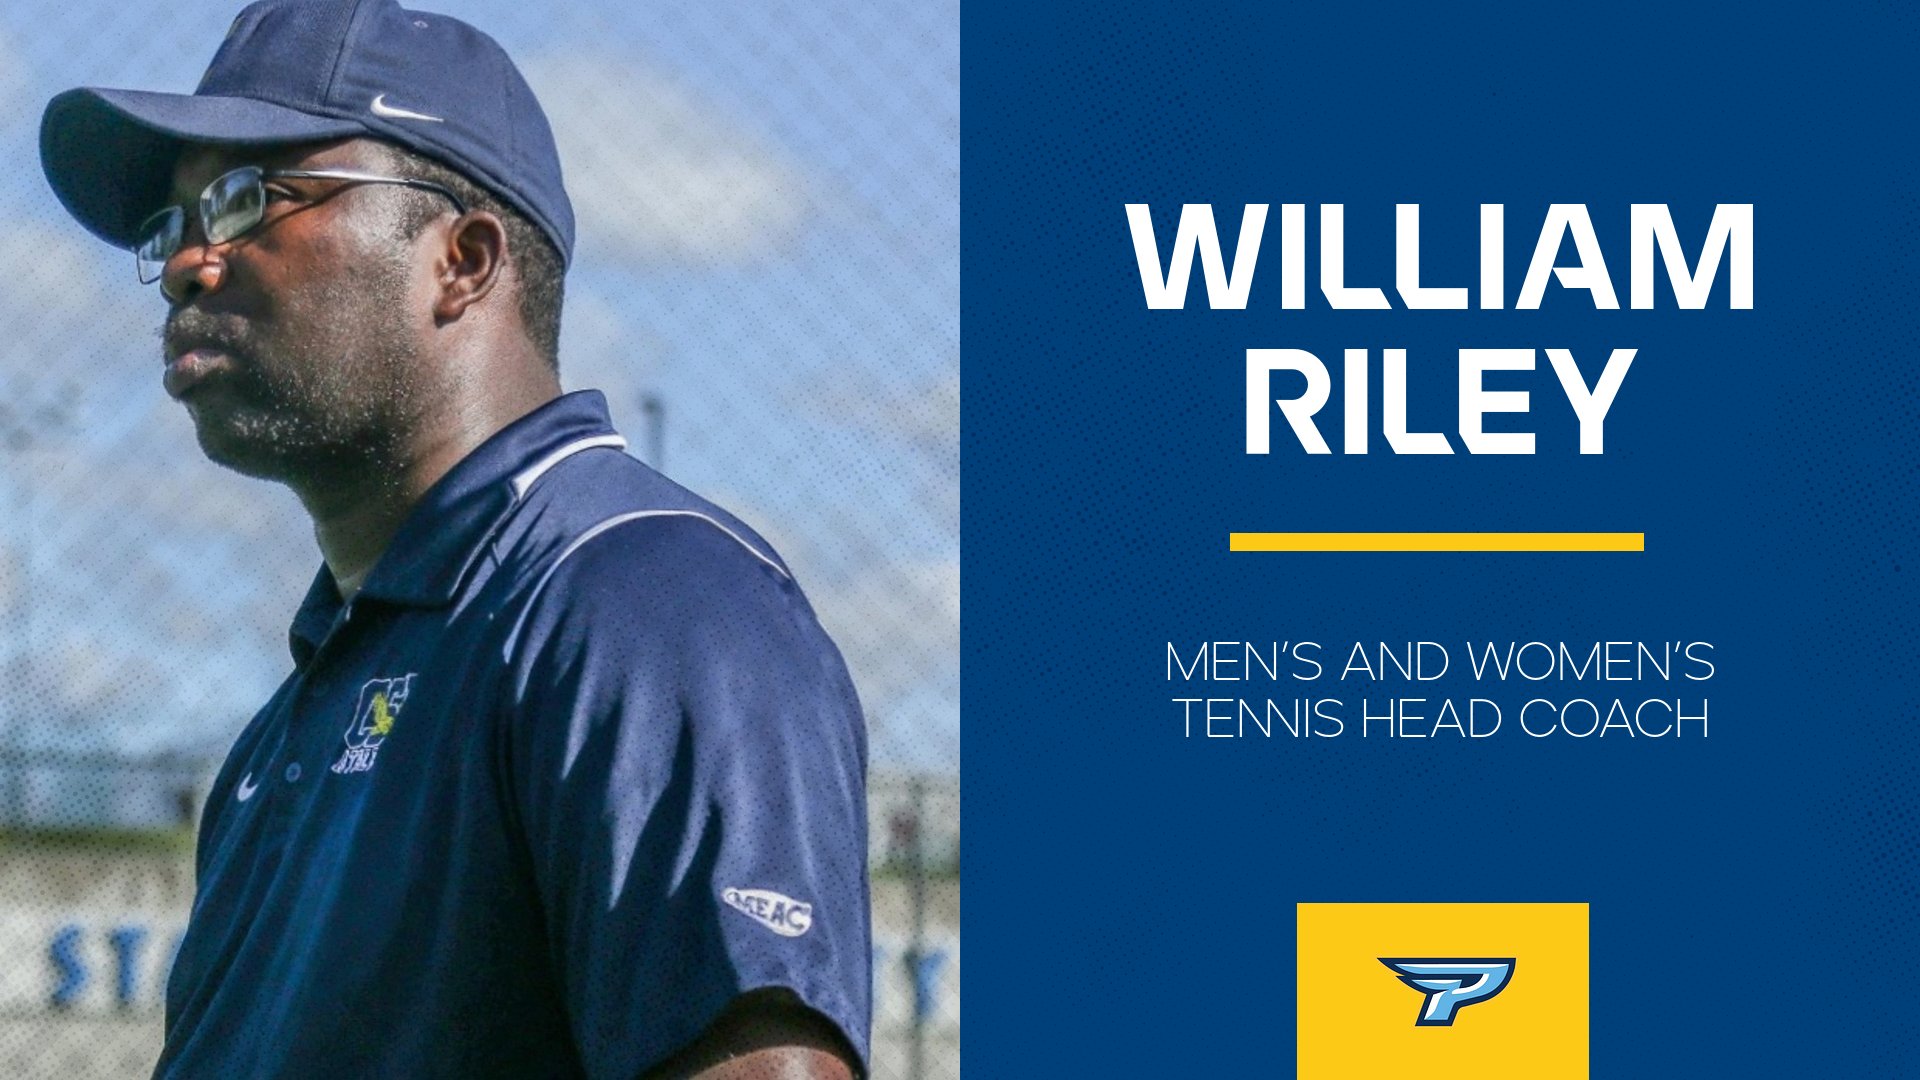 William Riley takes over tennis programs